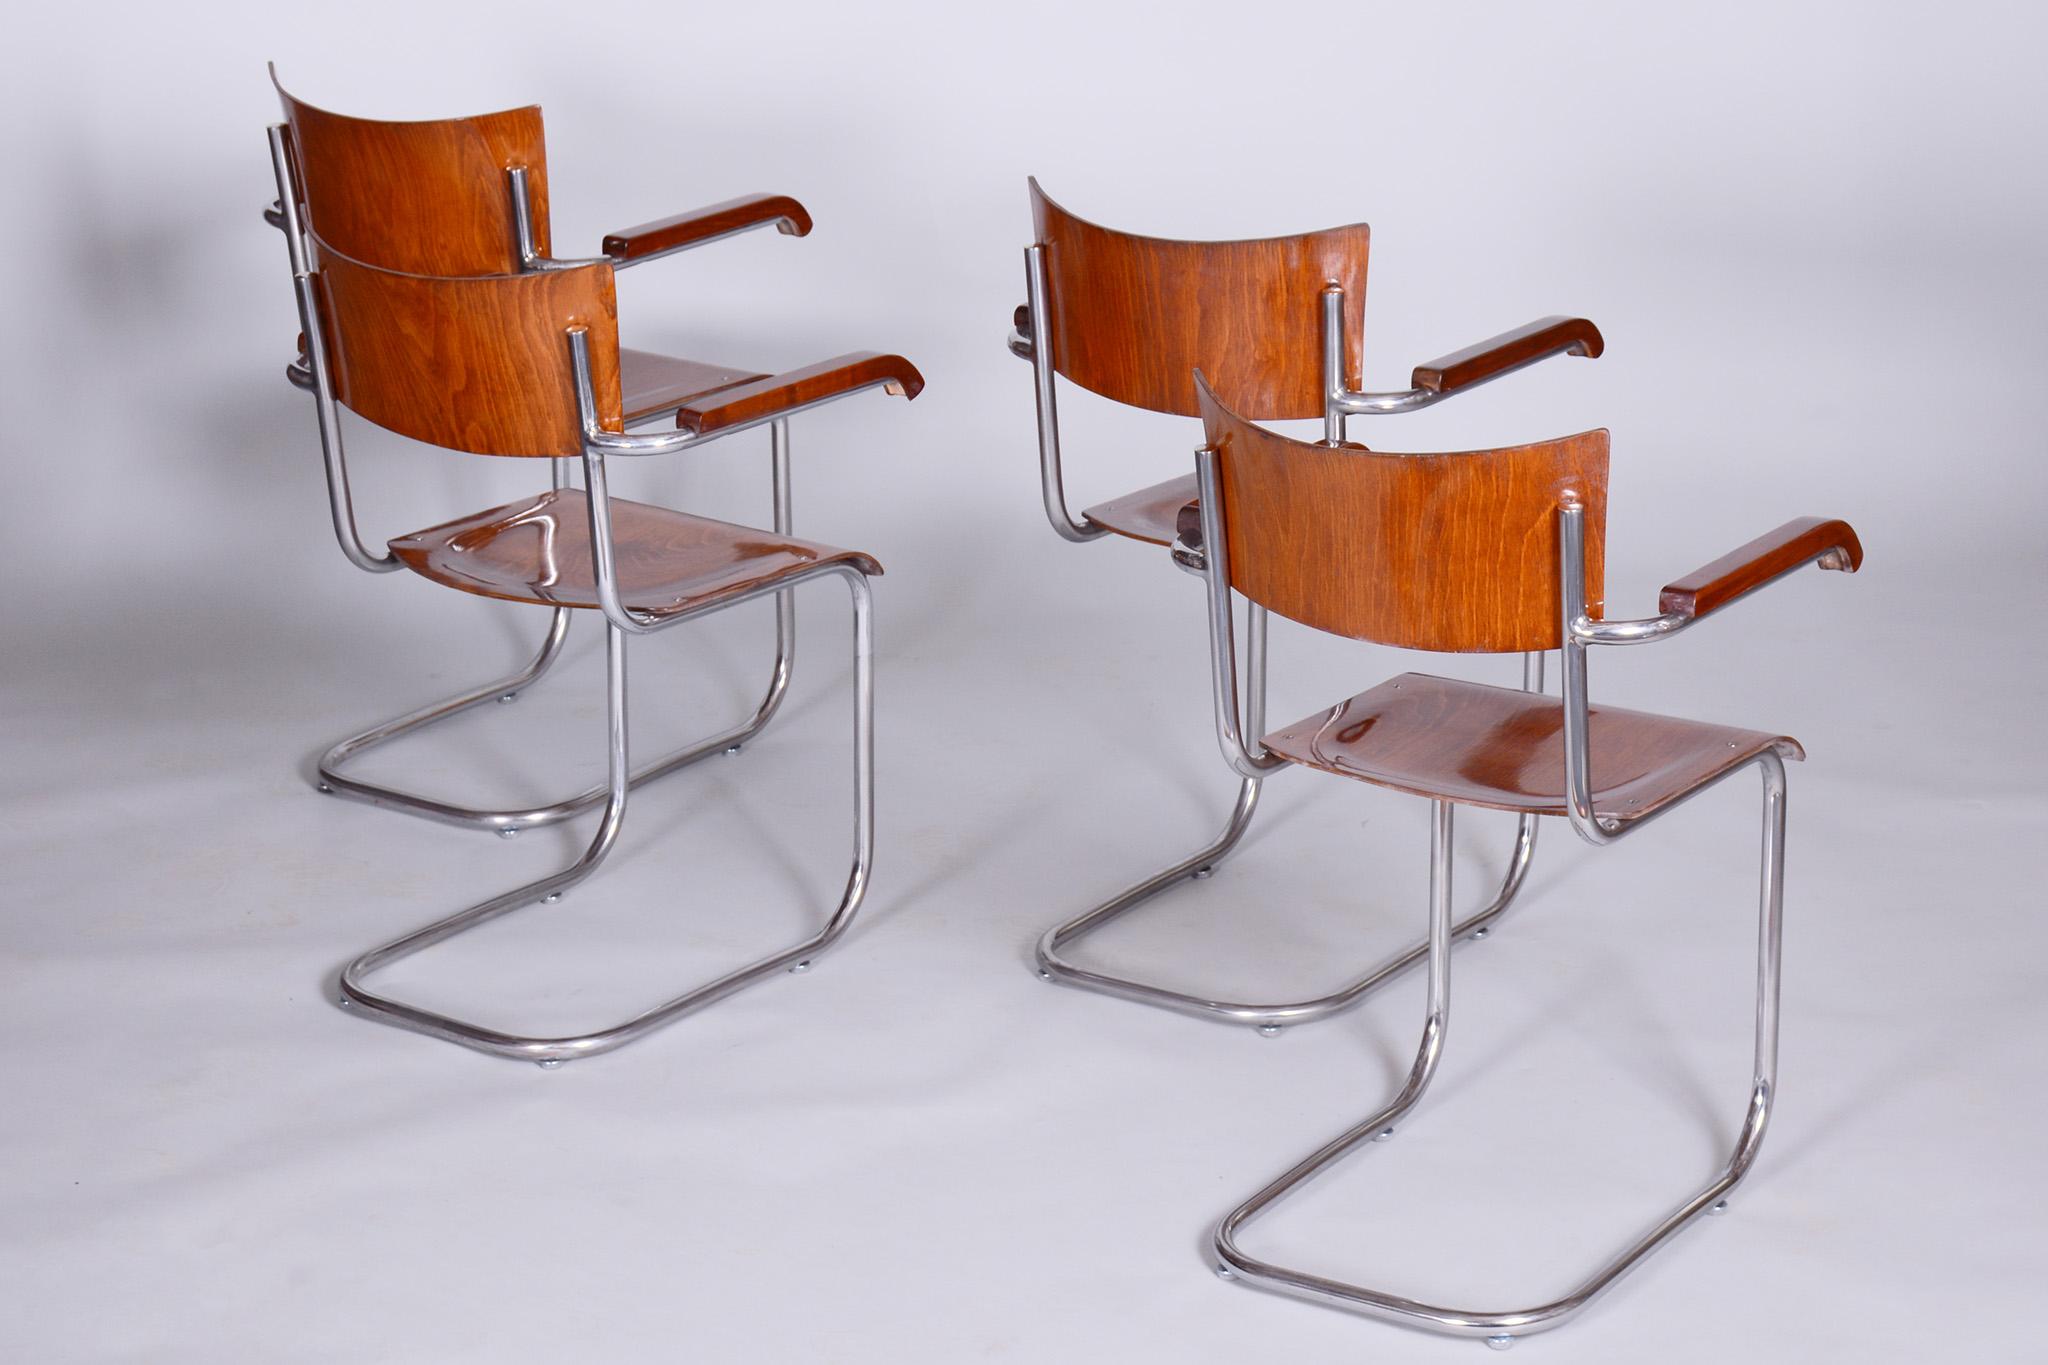 Chrome Set of 4 Restored Bauhaus Beech Armchairs Designed by Mart Stam, 1930s, Czechia For Sale